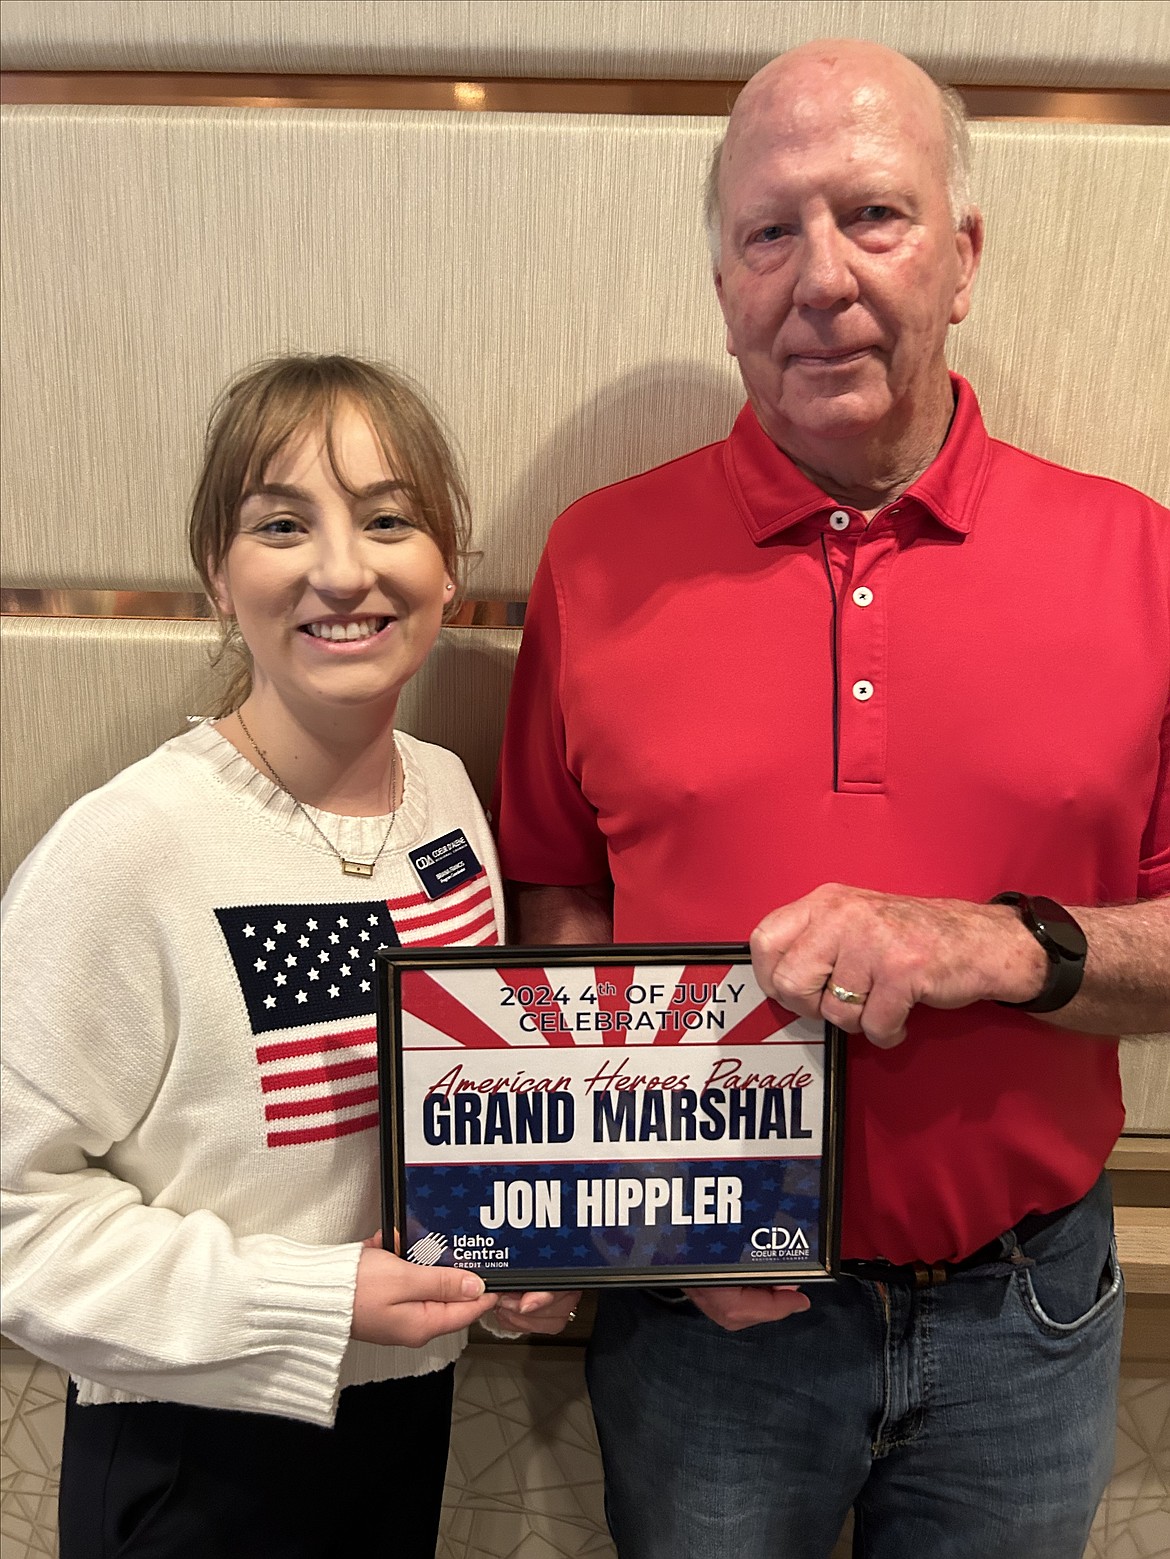 Jon Hippler was named grand marshal of the Coeur d'Alene Regional Chamber's American Heroes Parade on July Fourth. He is joined by Briana Francis, parade director.